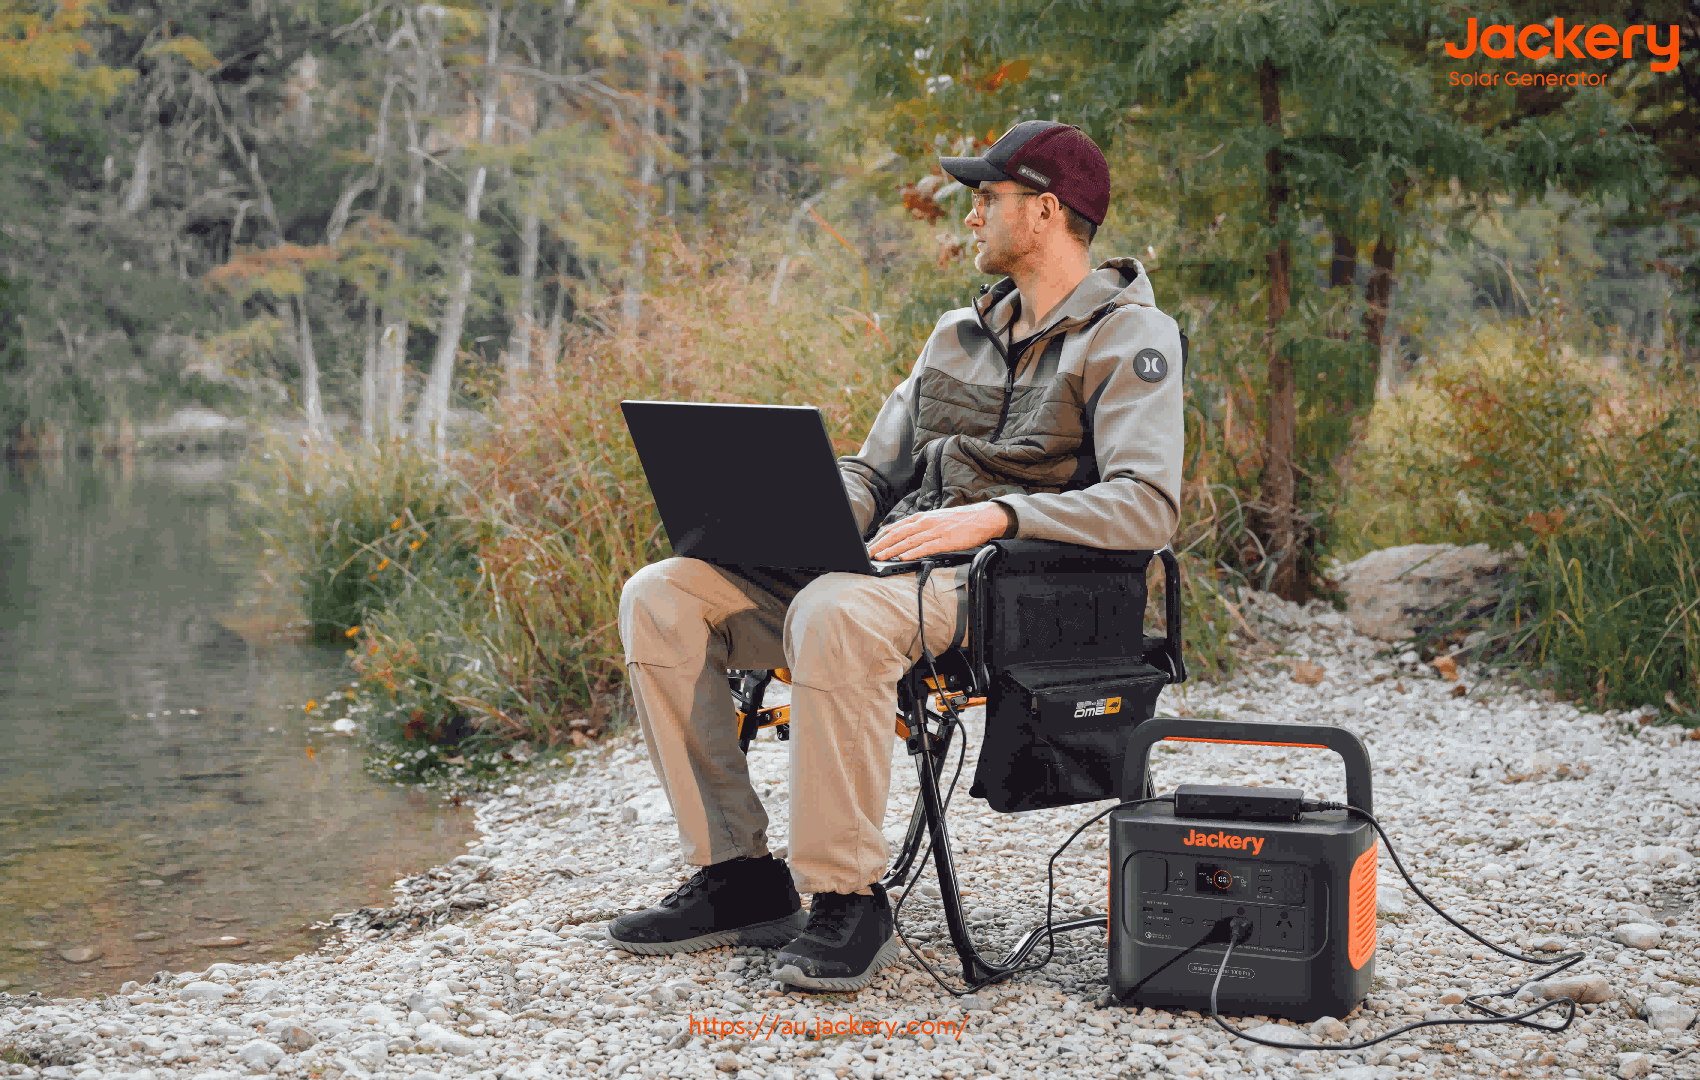 jackery portable power station with lithium-ion battery